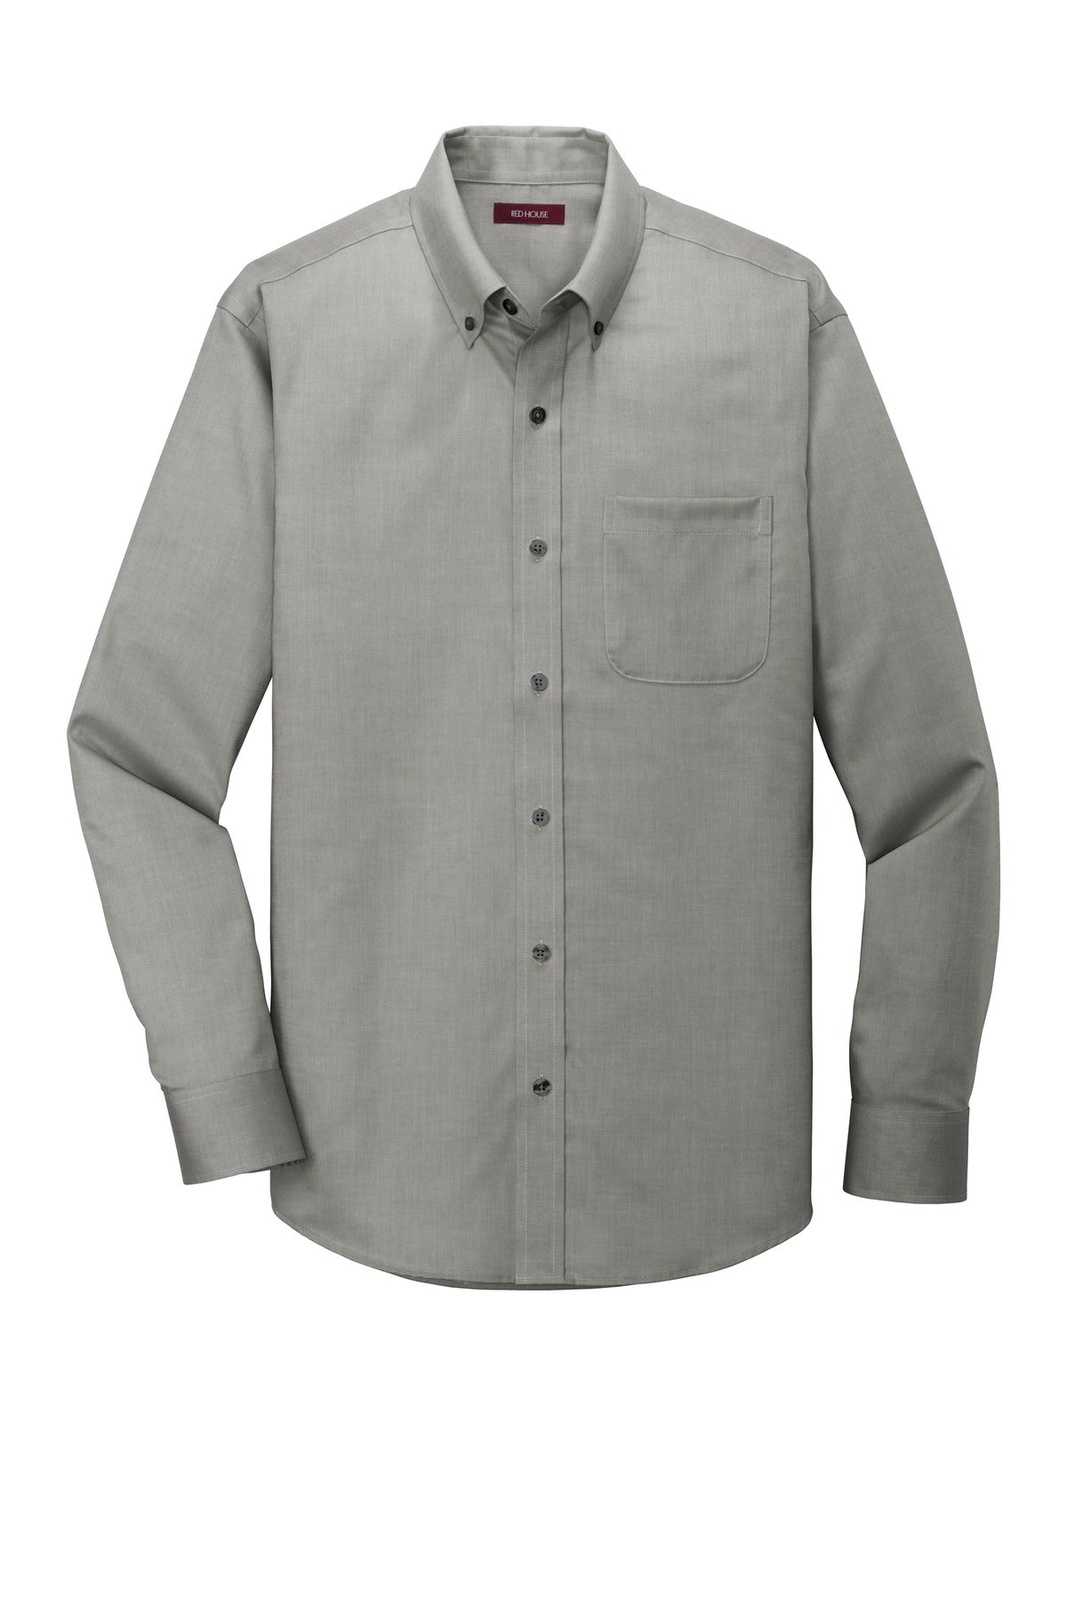 Red House RH240 Pinpoint Oxford Non-Iron Shirt - Charcoal - HIT a Double - 5